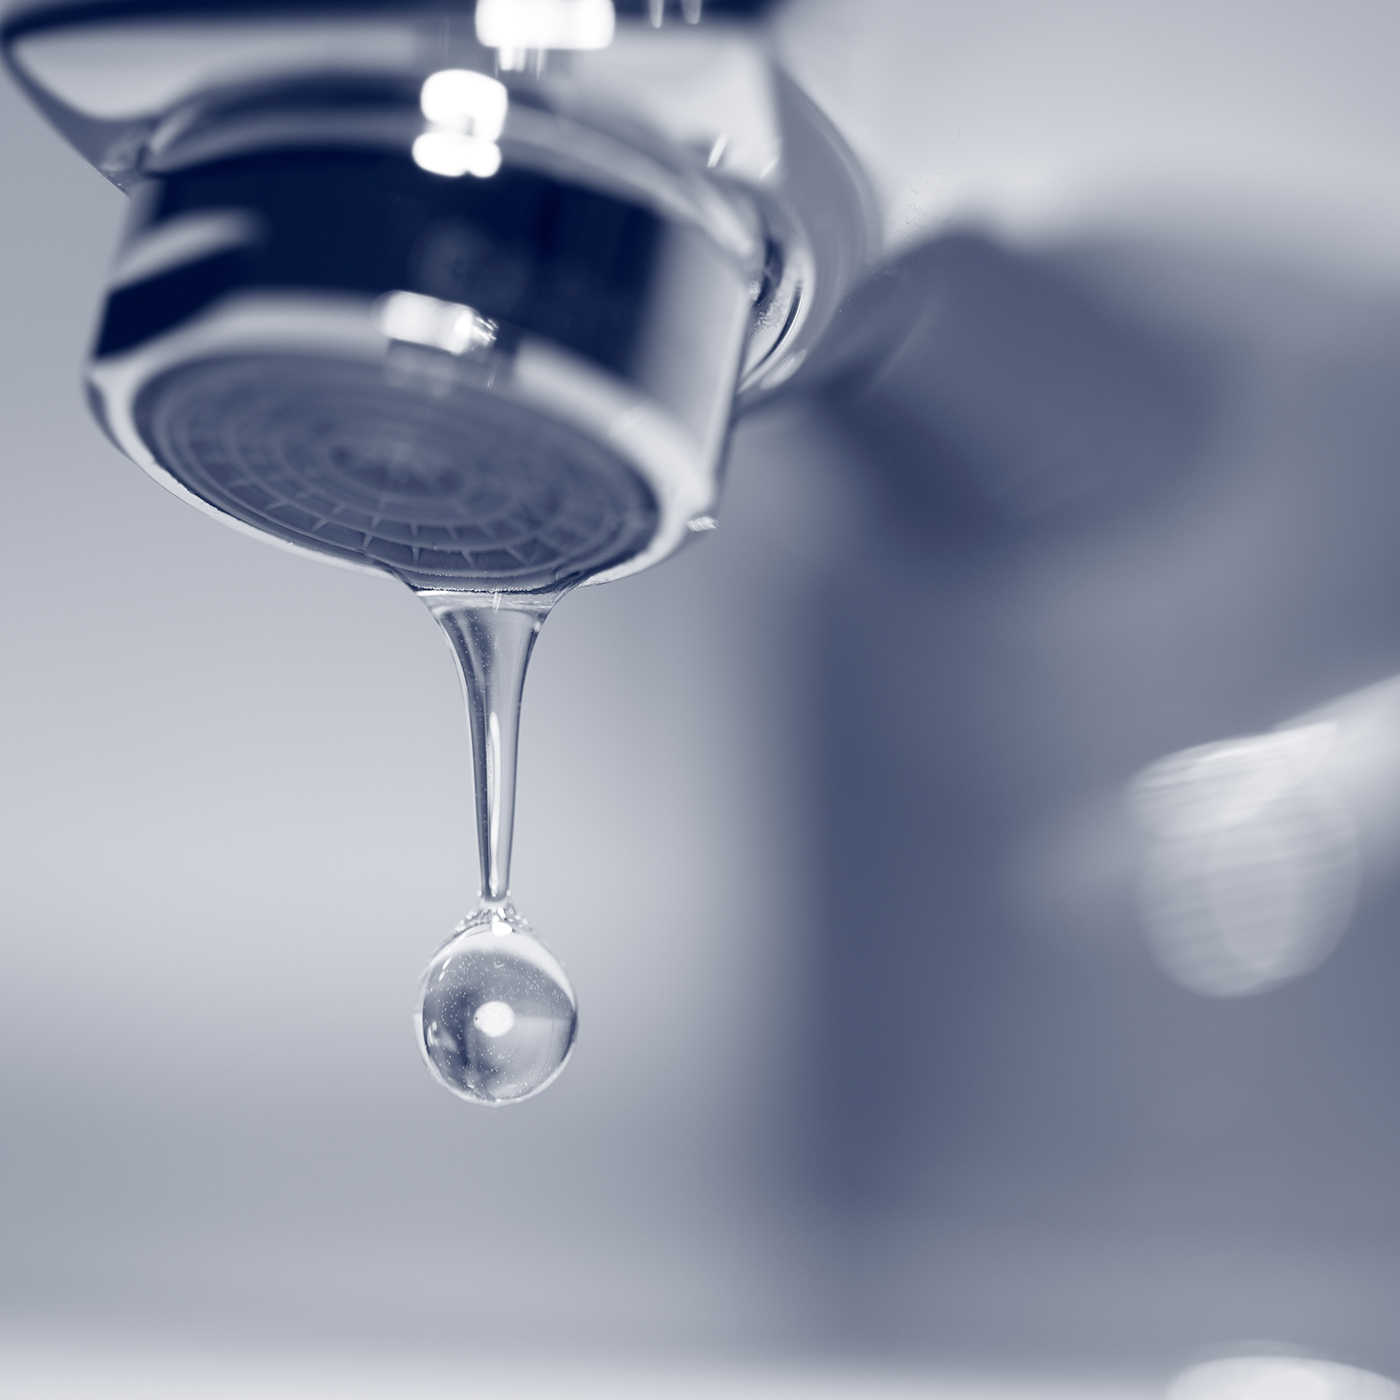 Official Francis Pegler - How to stop a dripping tap caused by a faulty washer - Blog